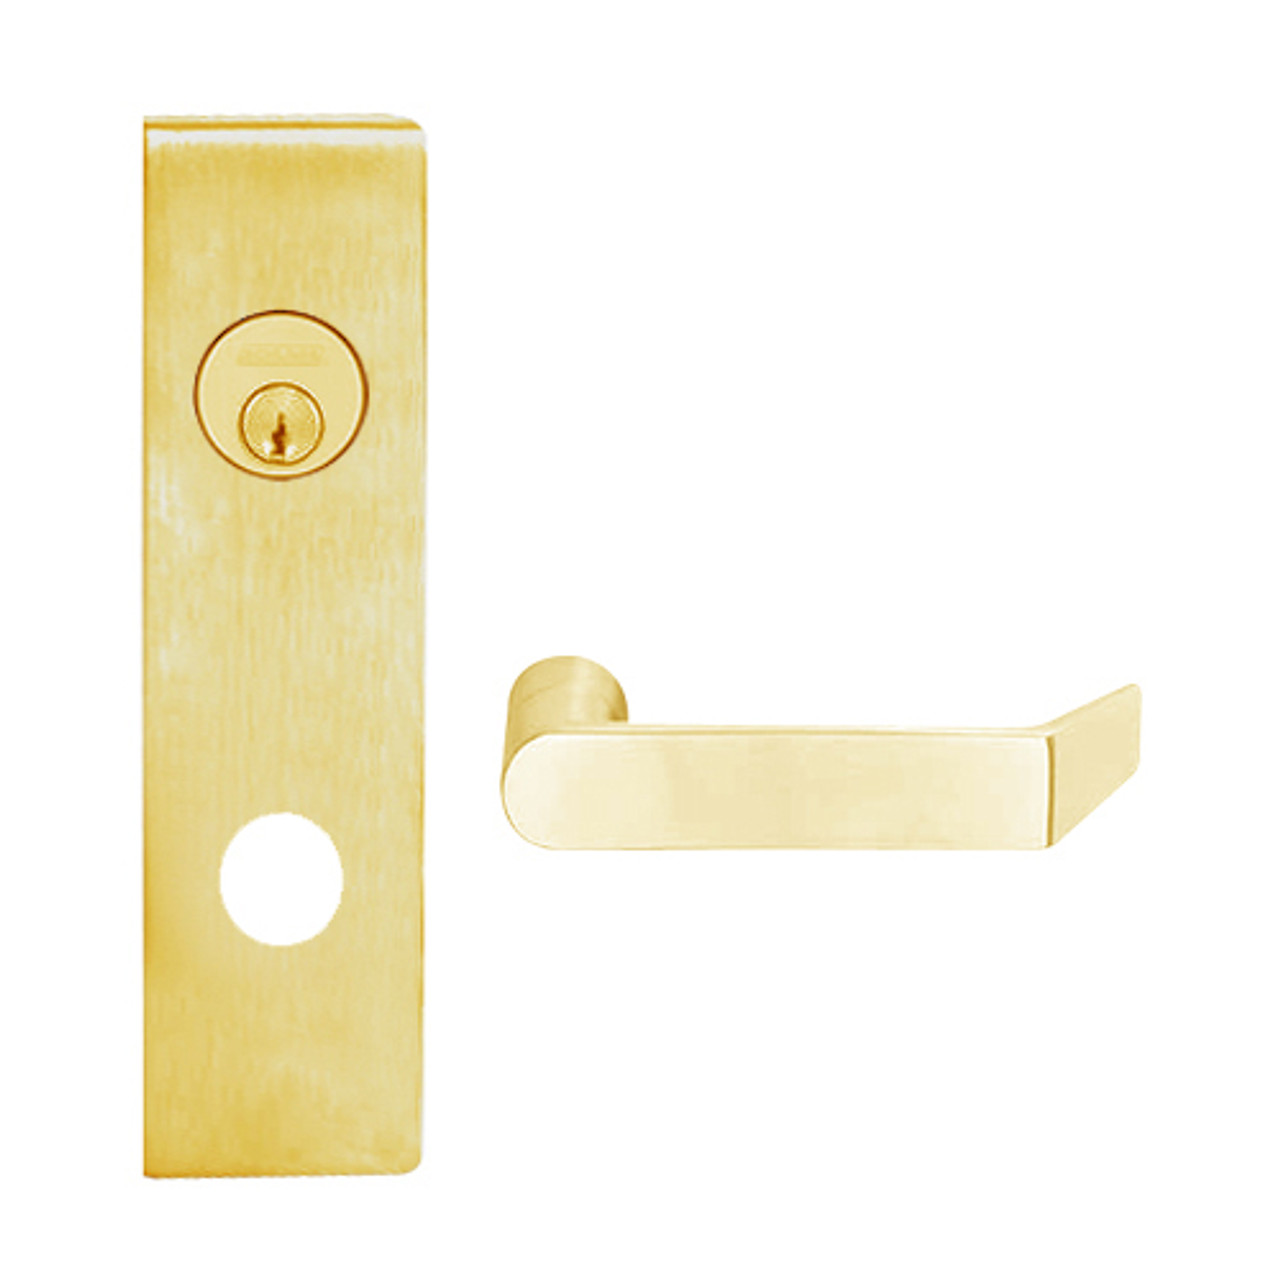 L9456L-06N-605 Schlage L Series Less Cylinder Corridor with Deadbolt Commercial Mortise Lock with 06 Cast Lever Design in Bright Brass